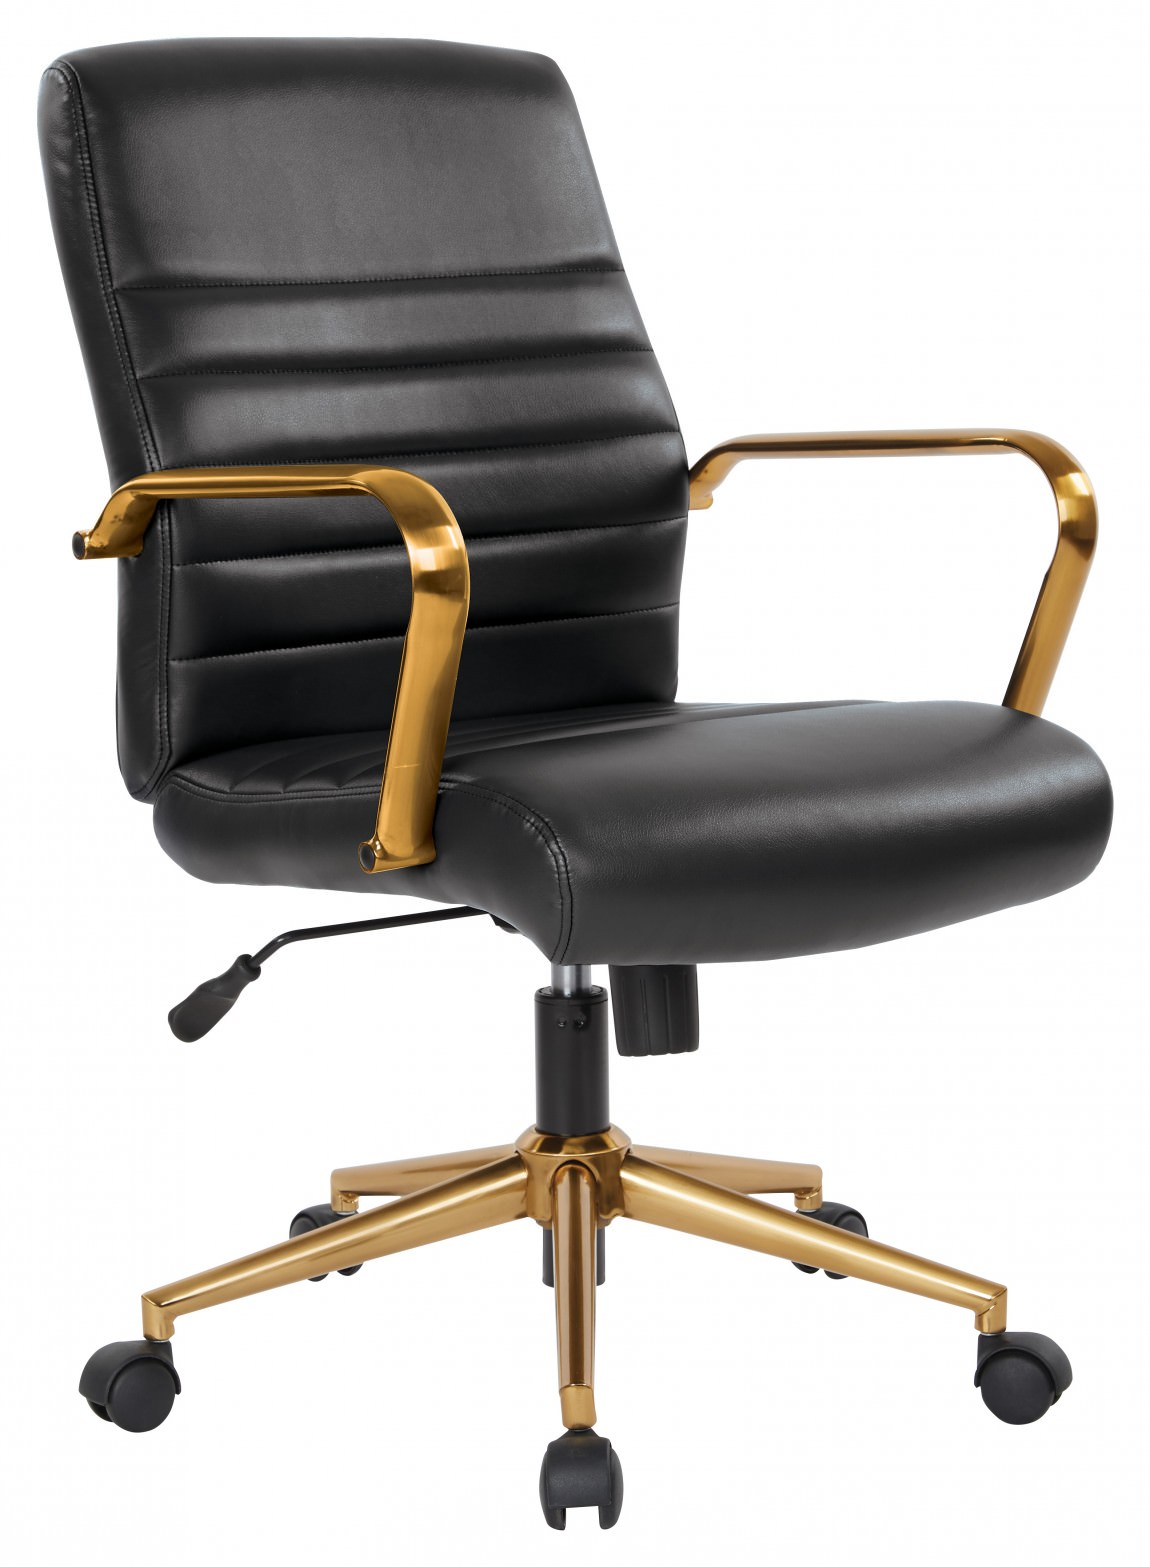 Executive Conference Chair